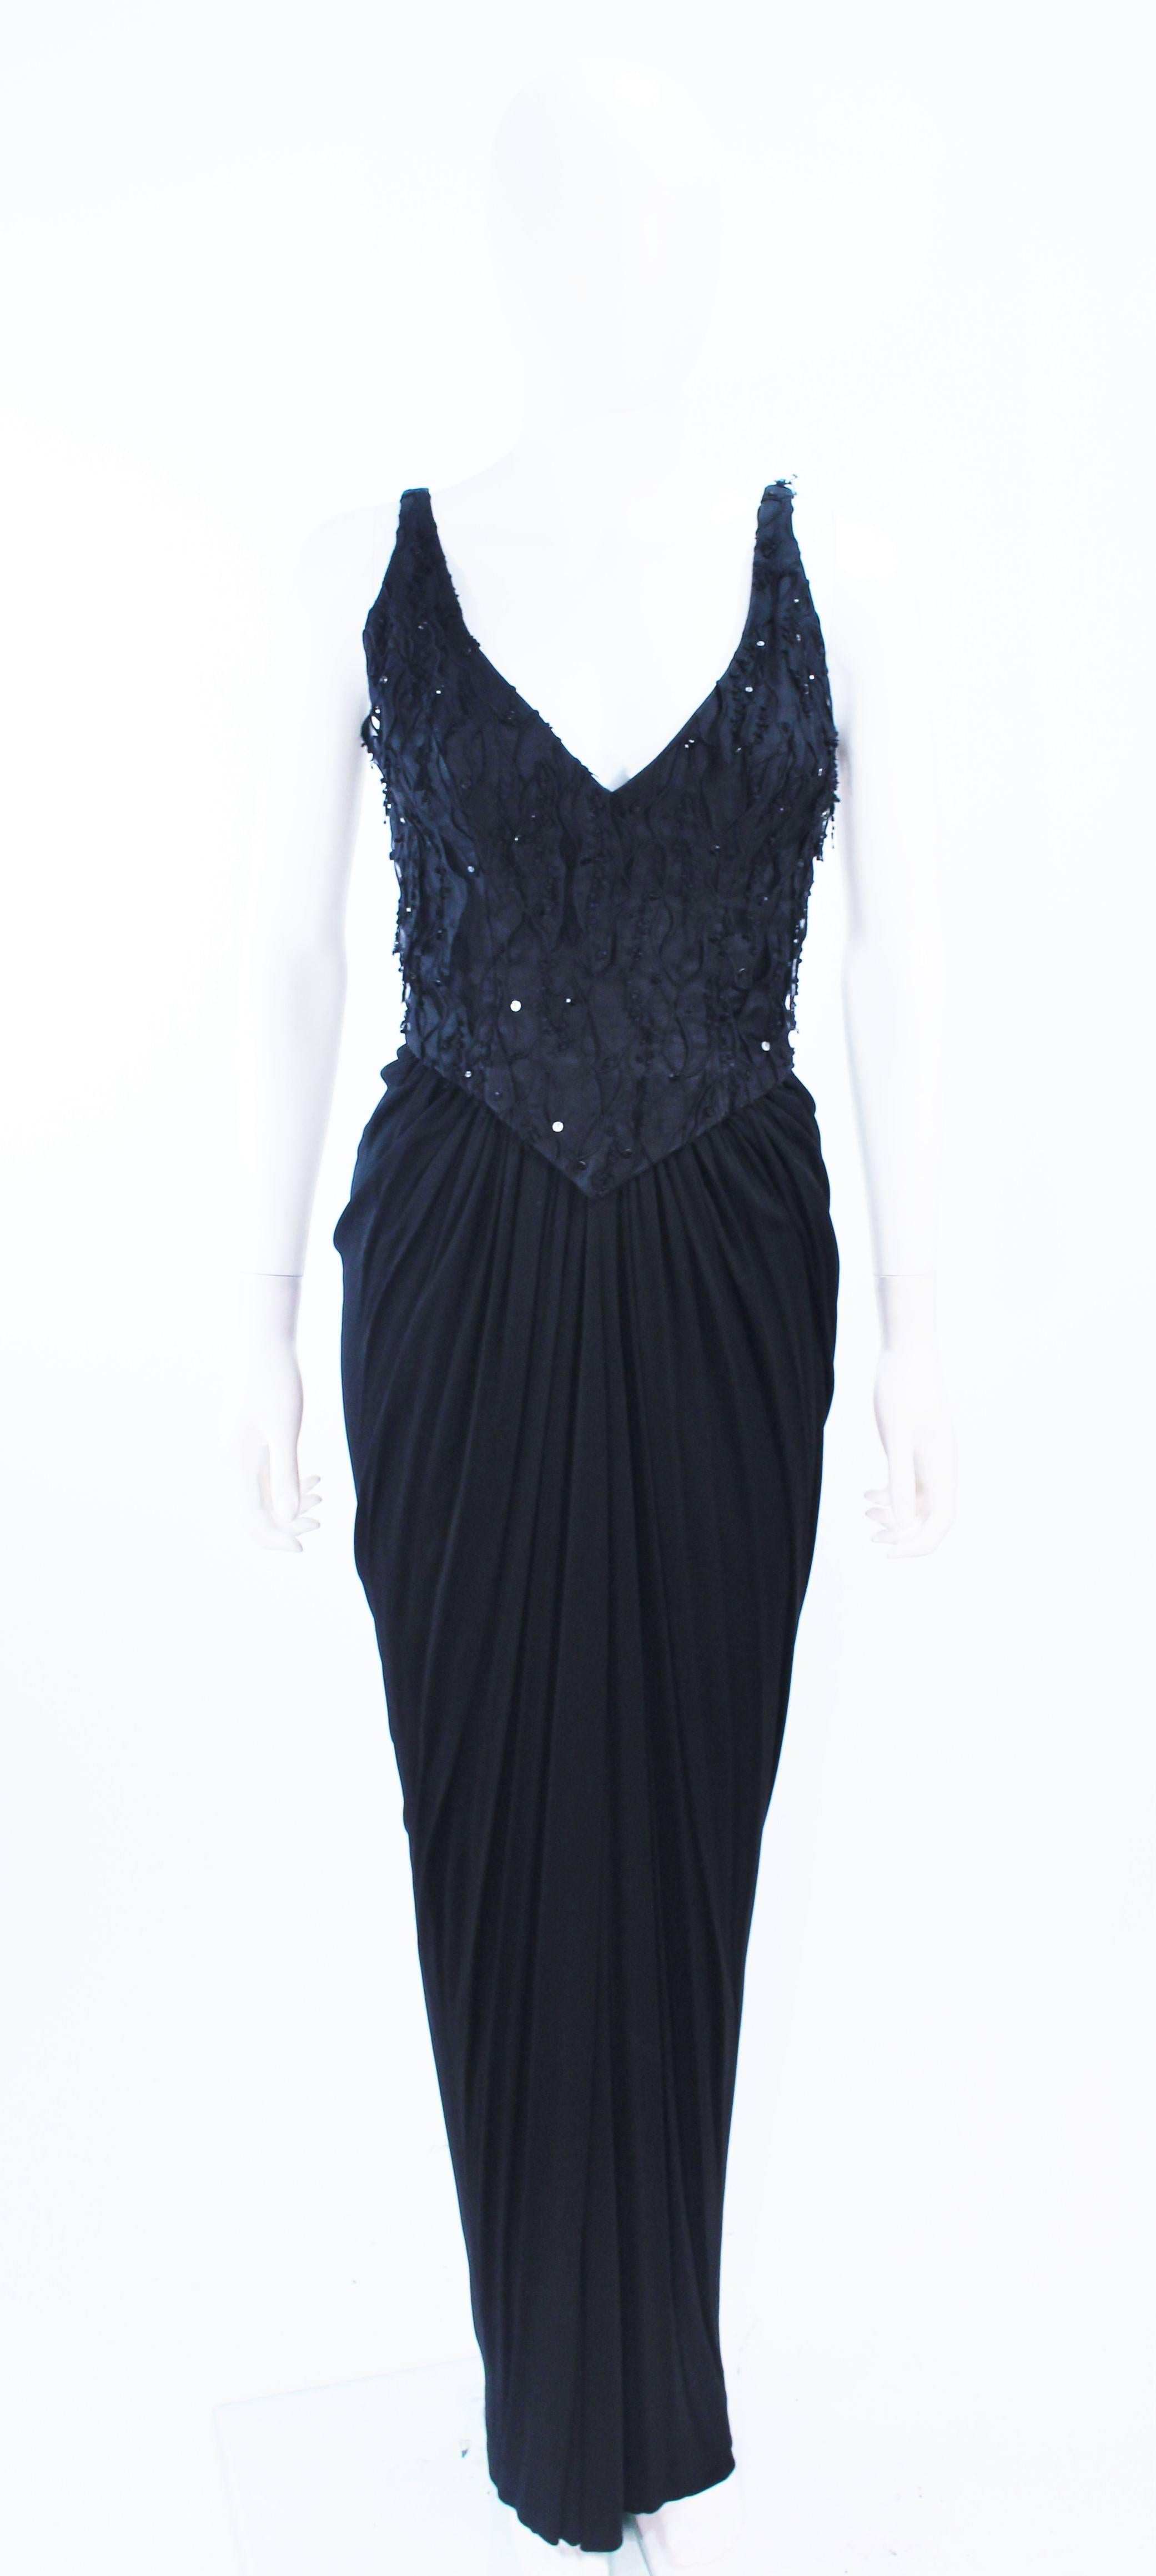 Vintage 1960's Black Silk Jersey Gown with Floral Applique & Rhinestones Size 4 For Sale 2